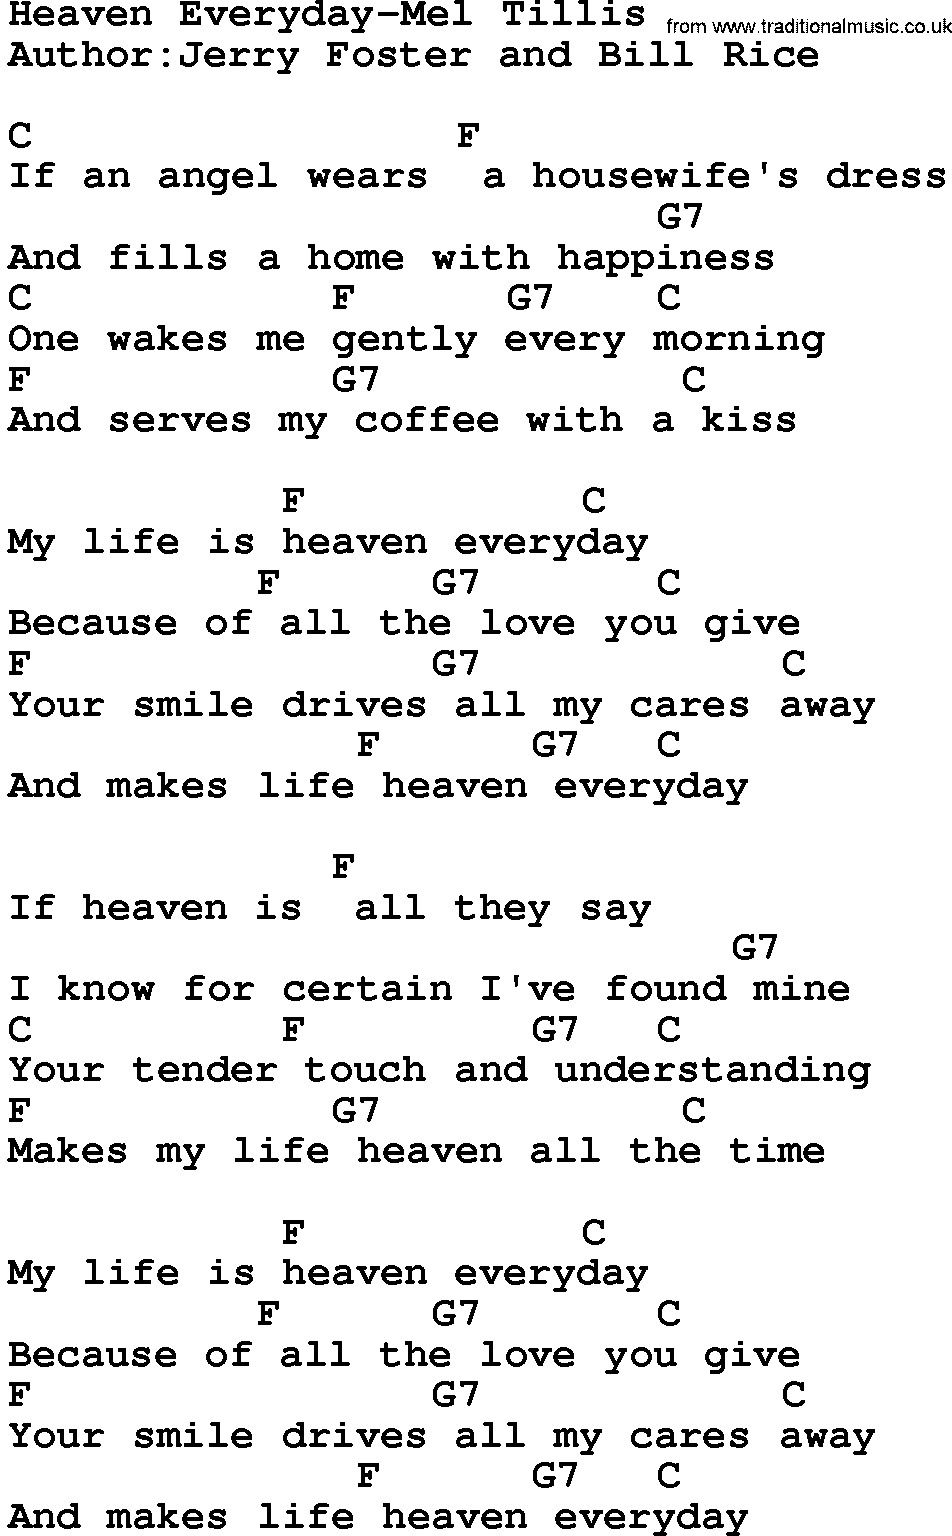 Country music song: Heaven Everyday-Mel Tillis lyrics and chords